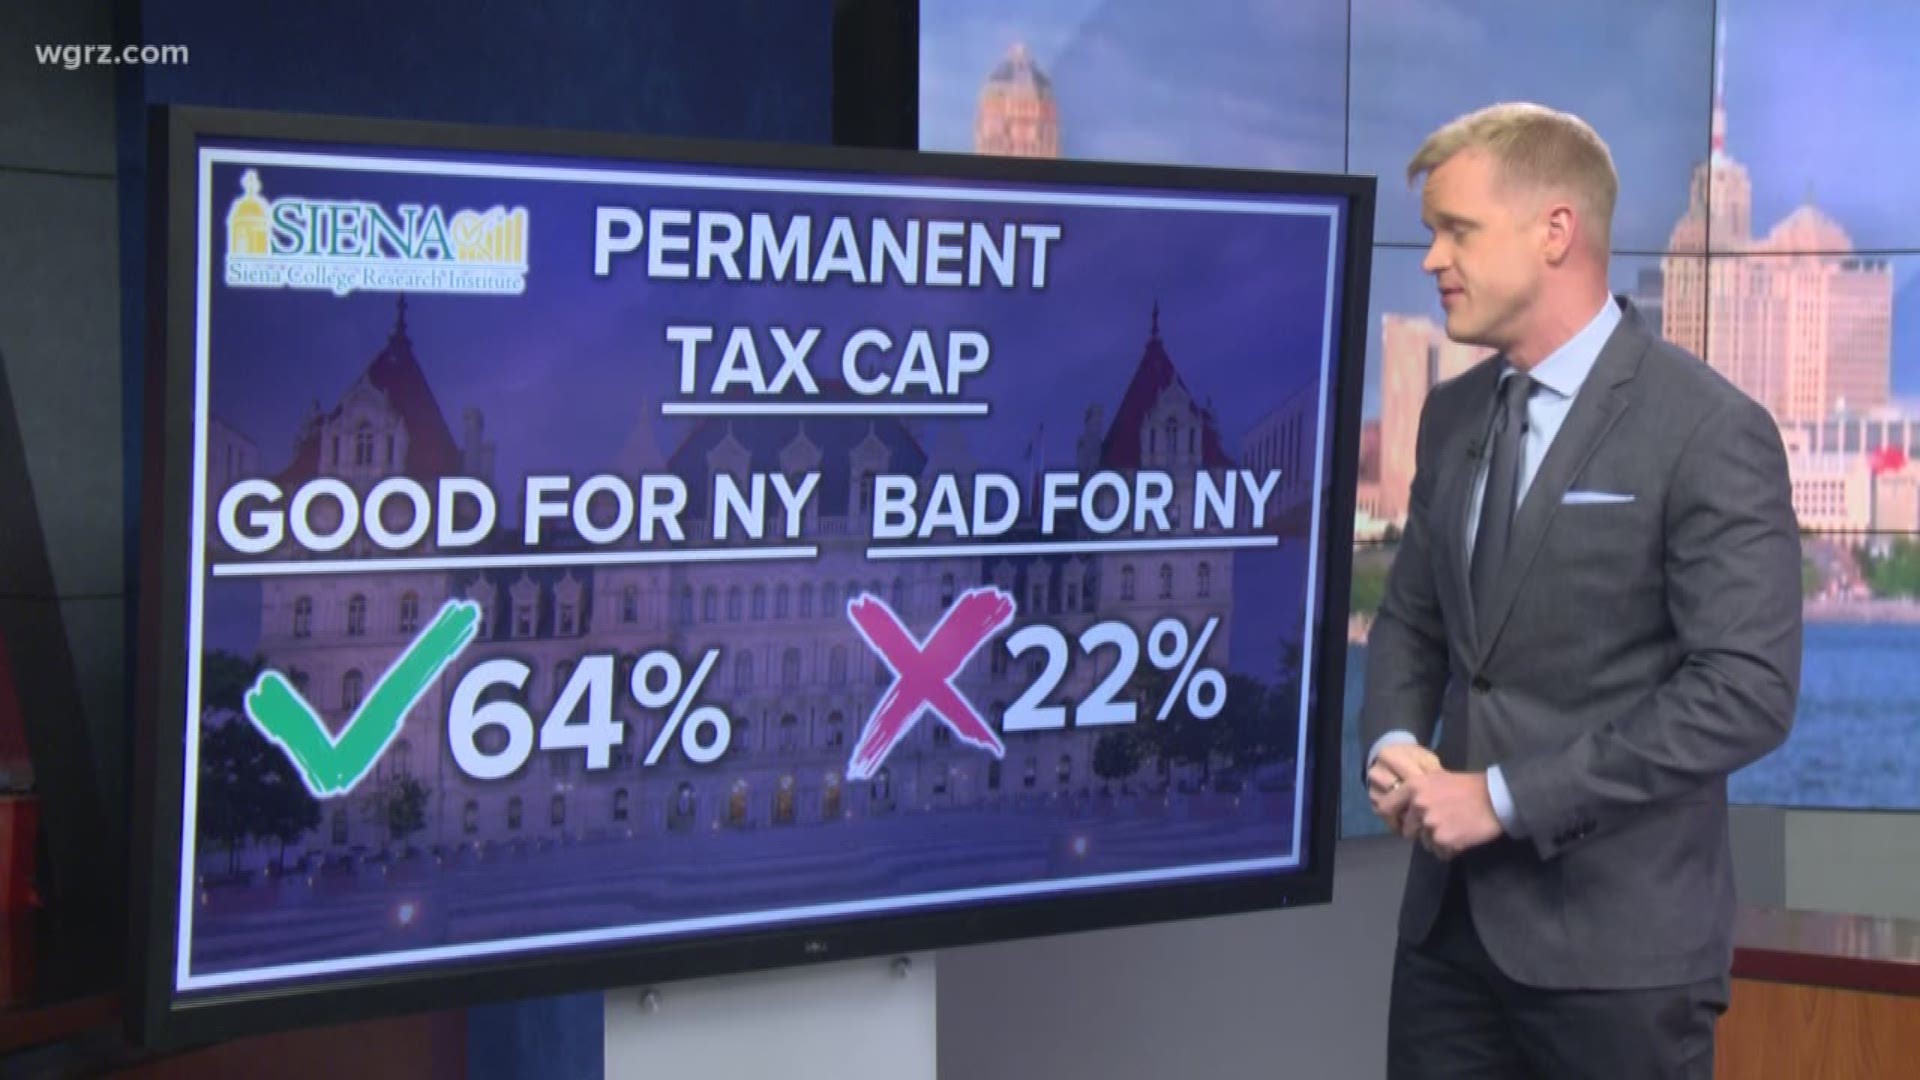 Michael Wooten goes through some of the poll numbers like the tax cap